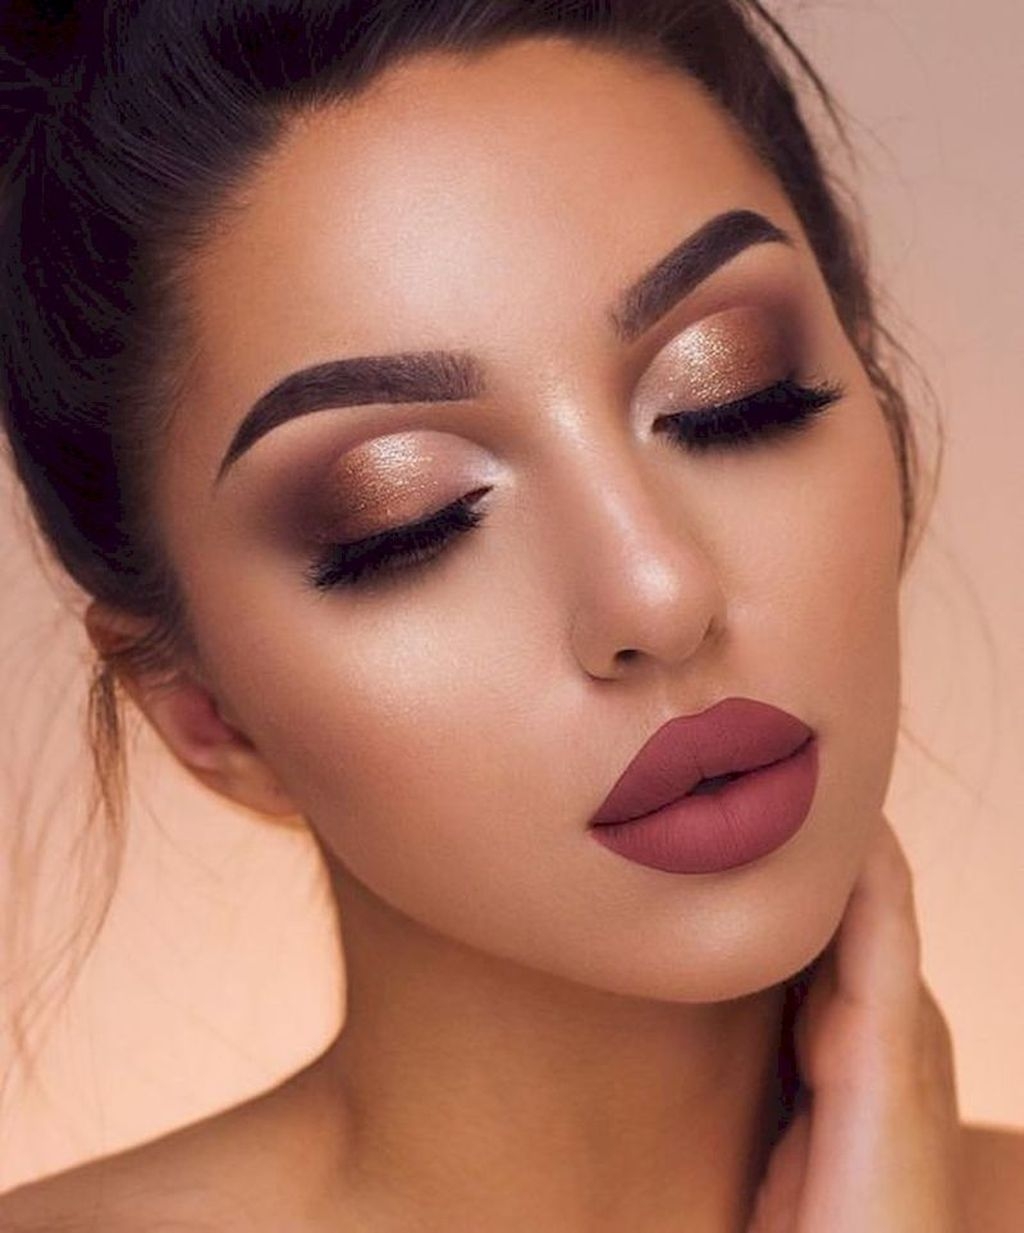 Latest Prom Makeup Ideas Looks Fantastic For Women16 